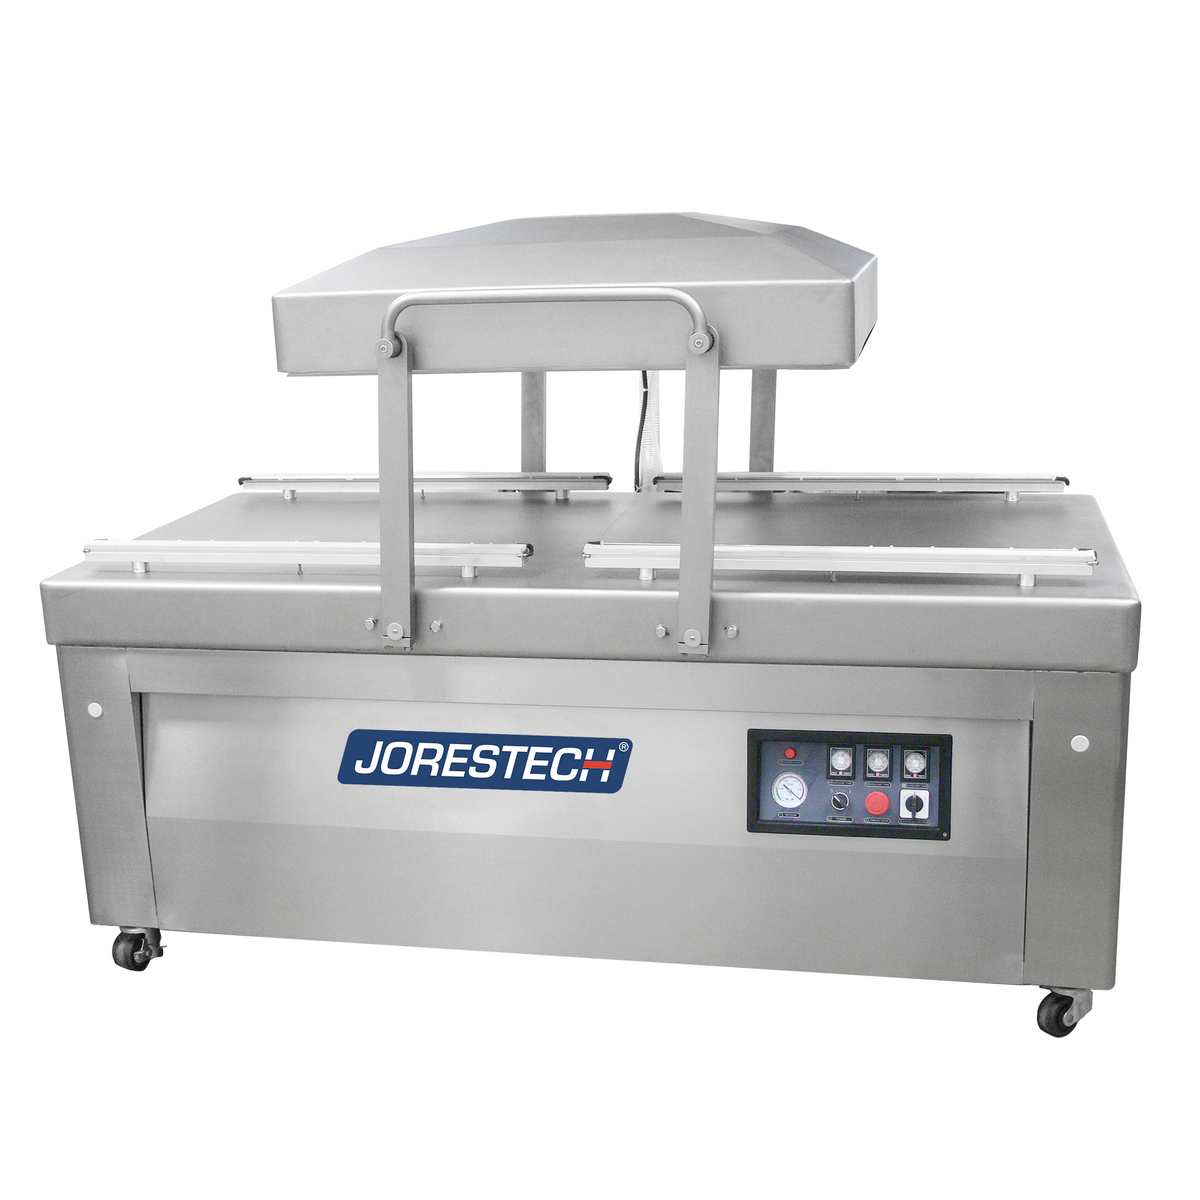 Commercial Vacuum Sealer with Double Chamber and Sealing Bars